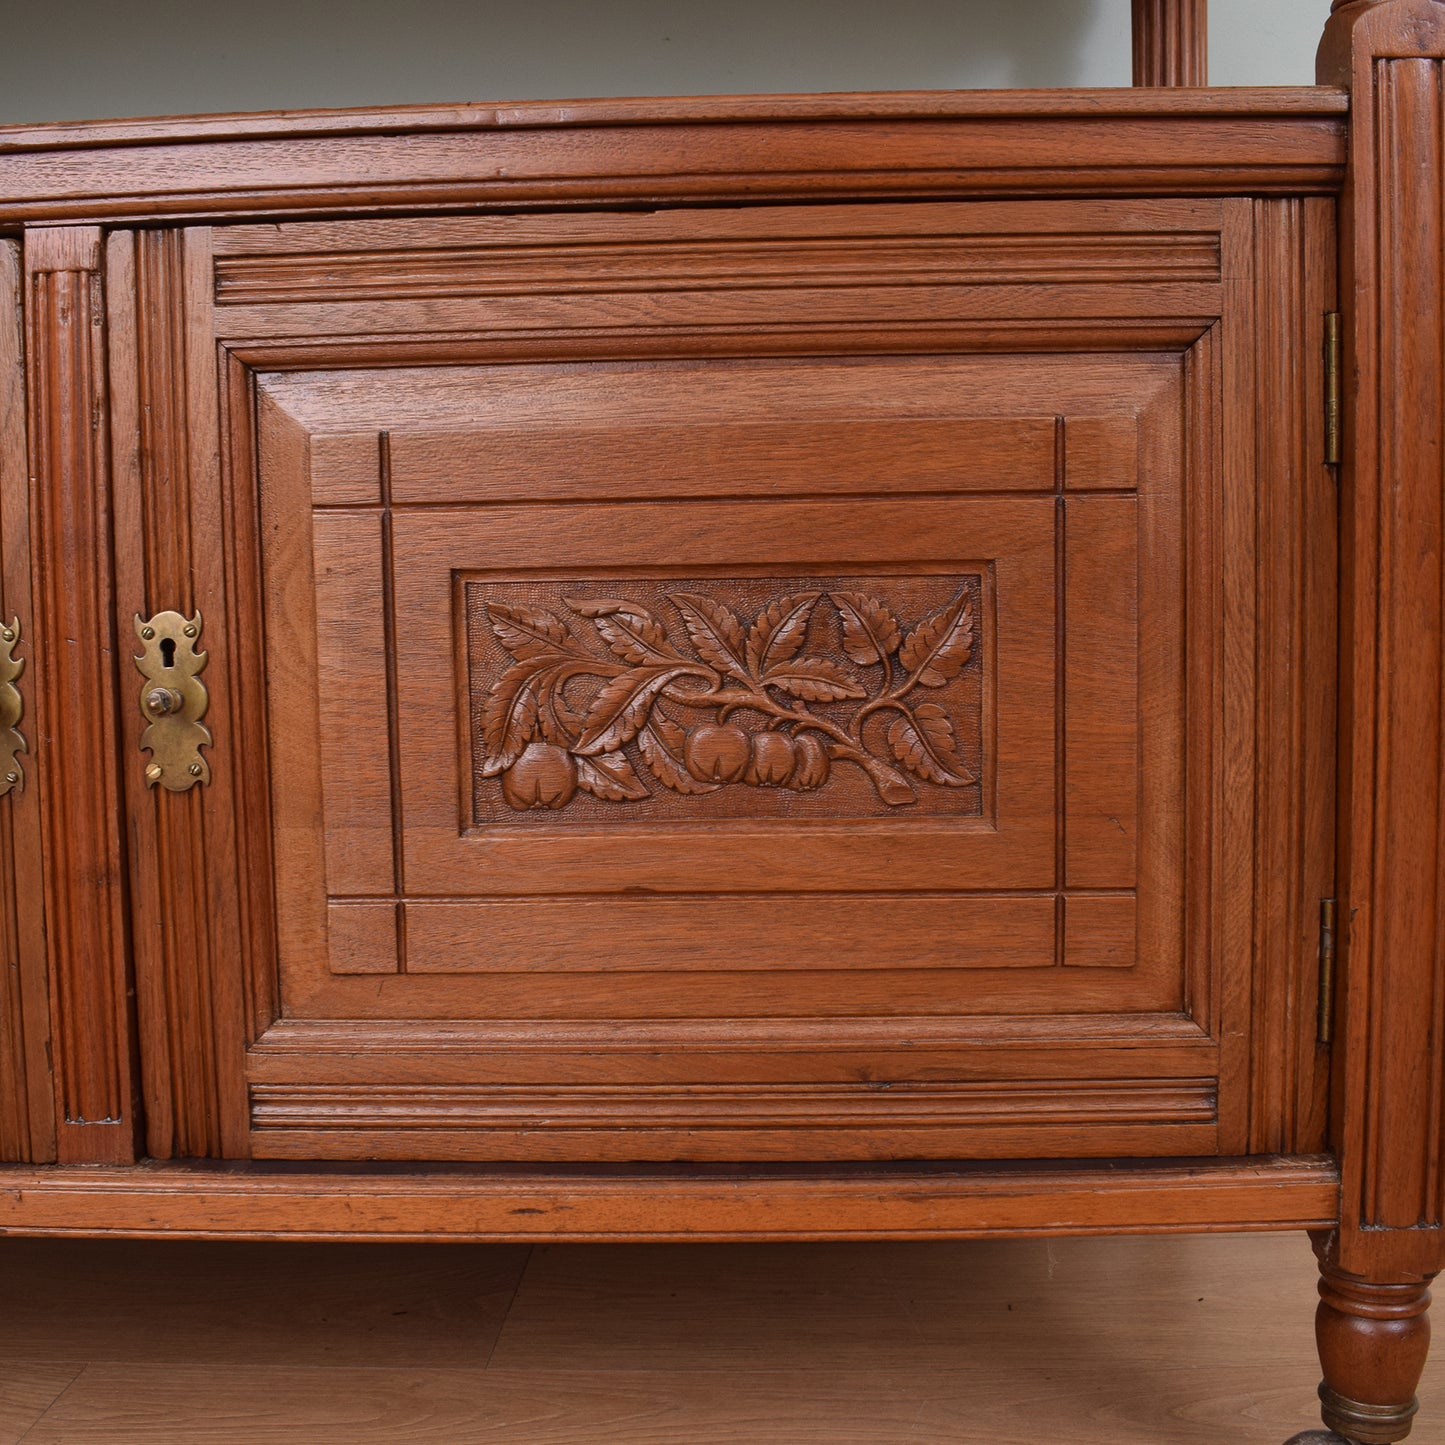 Mahogany Sideboard with Intricate Carvings